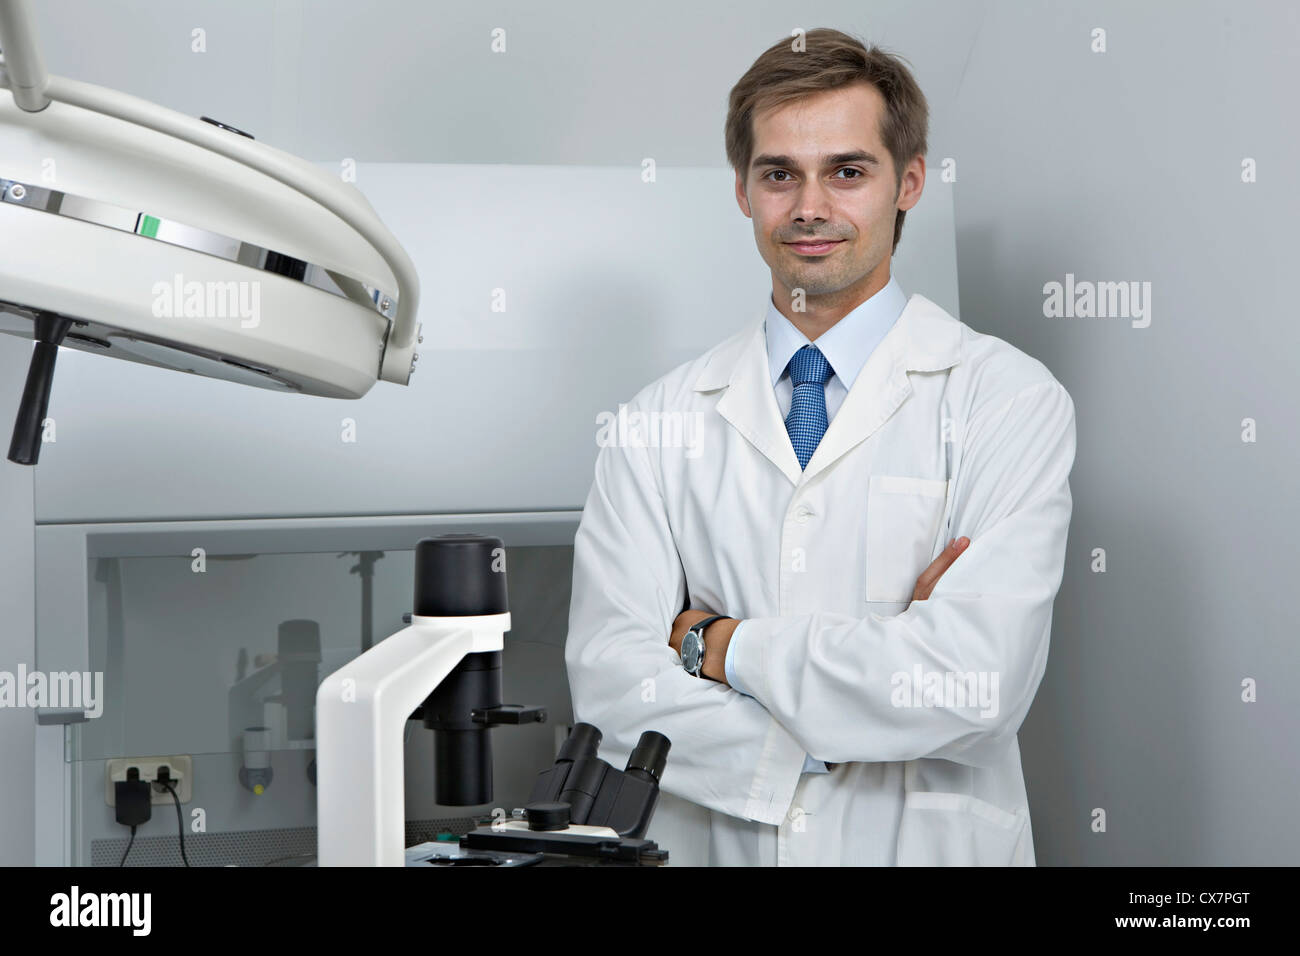 A smiling research technician standing in a research lab Stock Photo